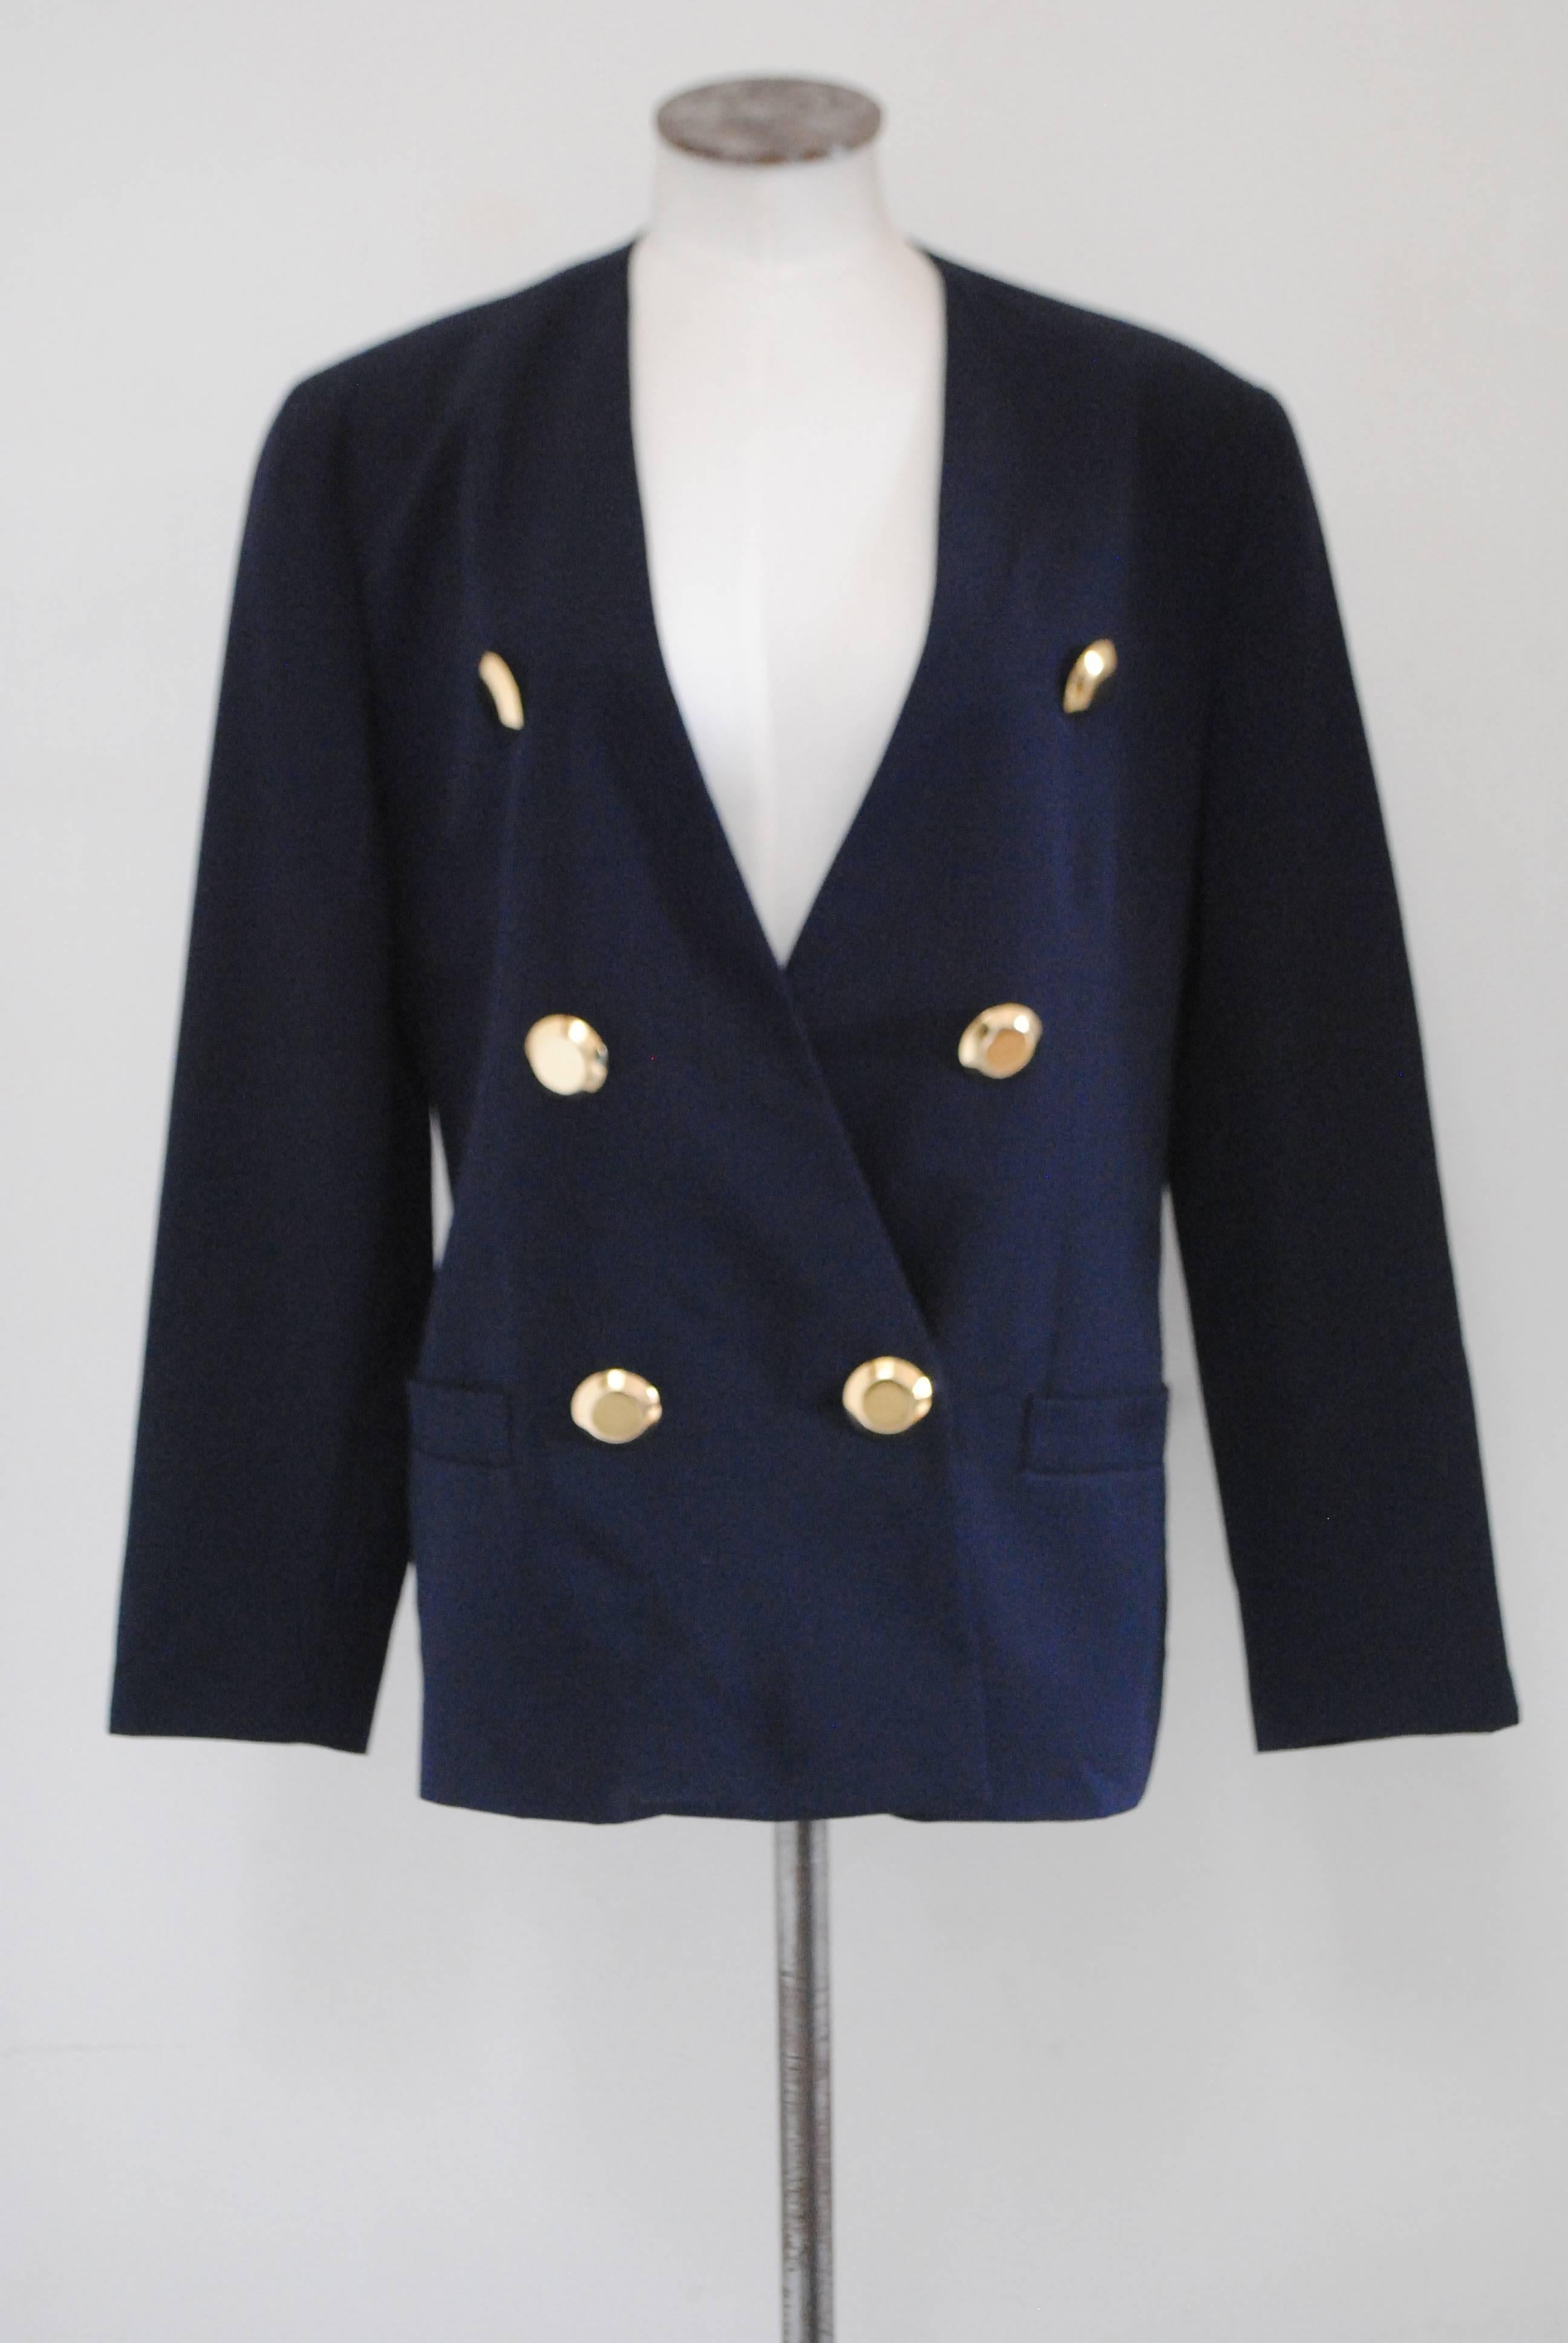 Genny by Gianni Versace Blu Wool Gold Bottons Jacket

Totally made in italy in size 46

Composition Wool

Embellished with huge 6 gold tone bottons all on the front